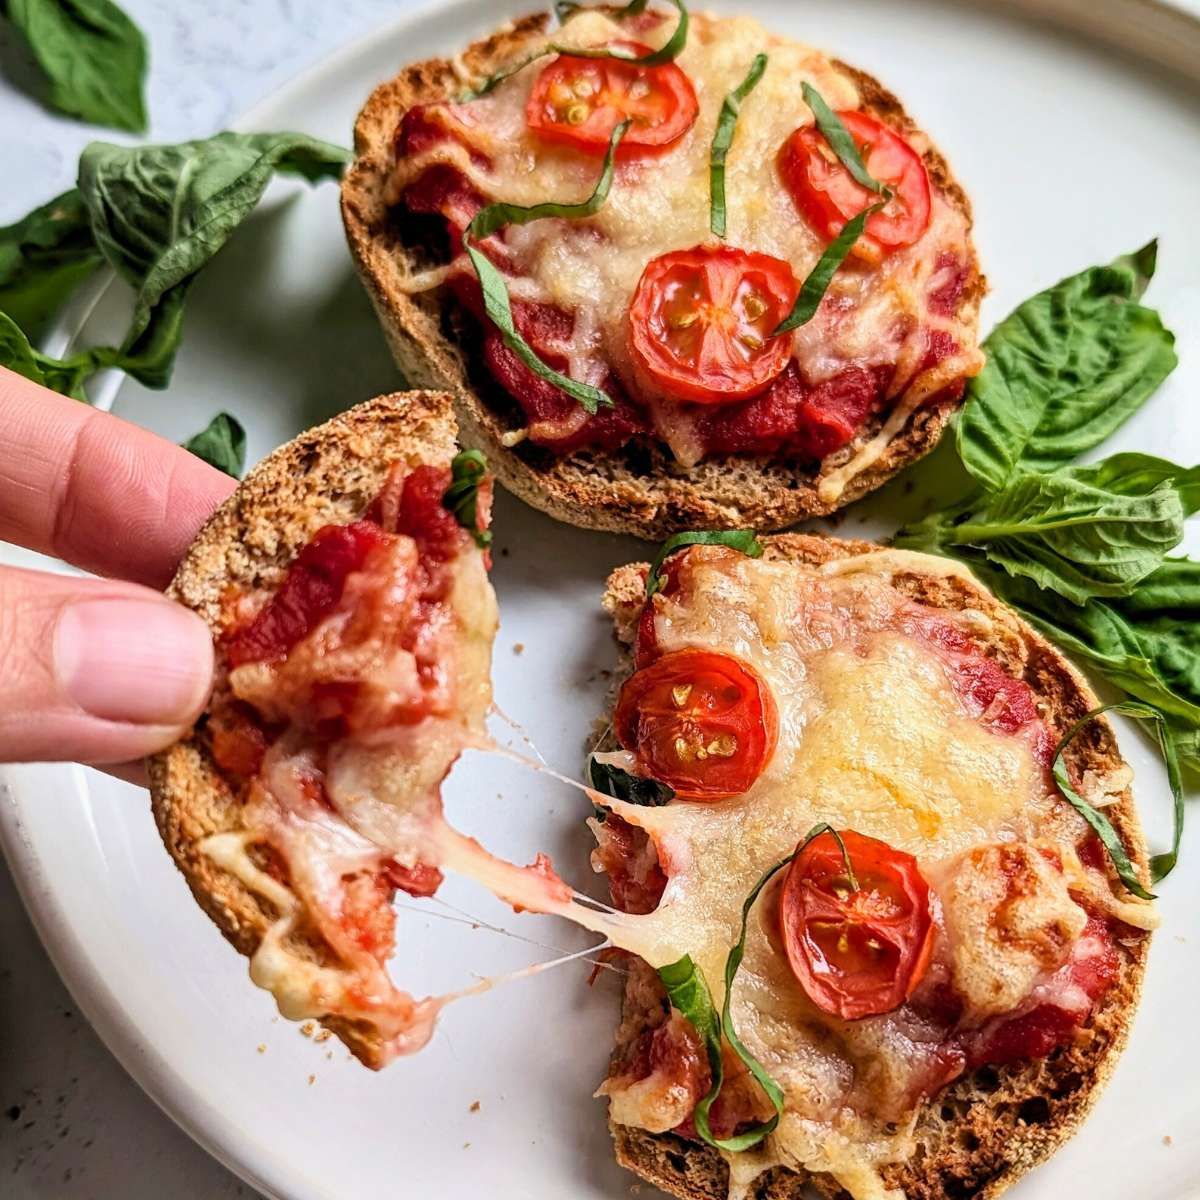 low sodium english muffin pizza recipe with tomatoes basil trader joe's enligsh muffins and no salt added pizza sauce